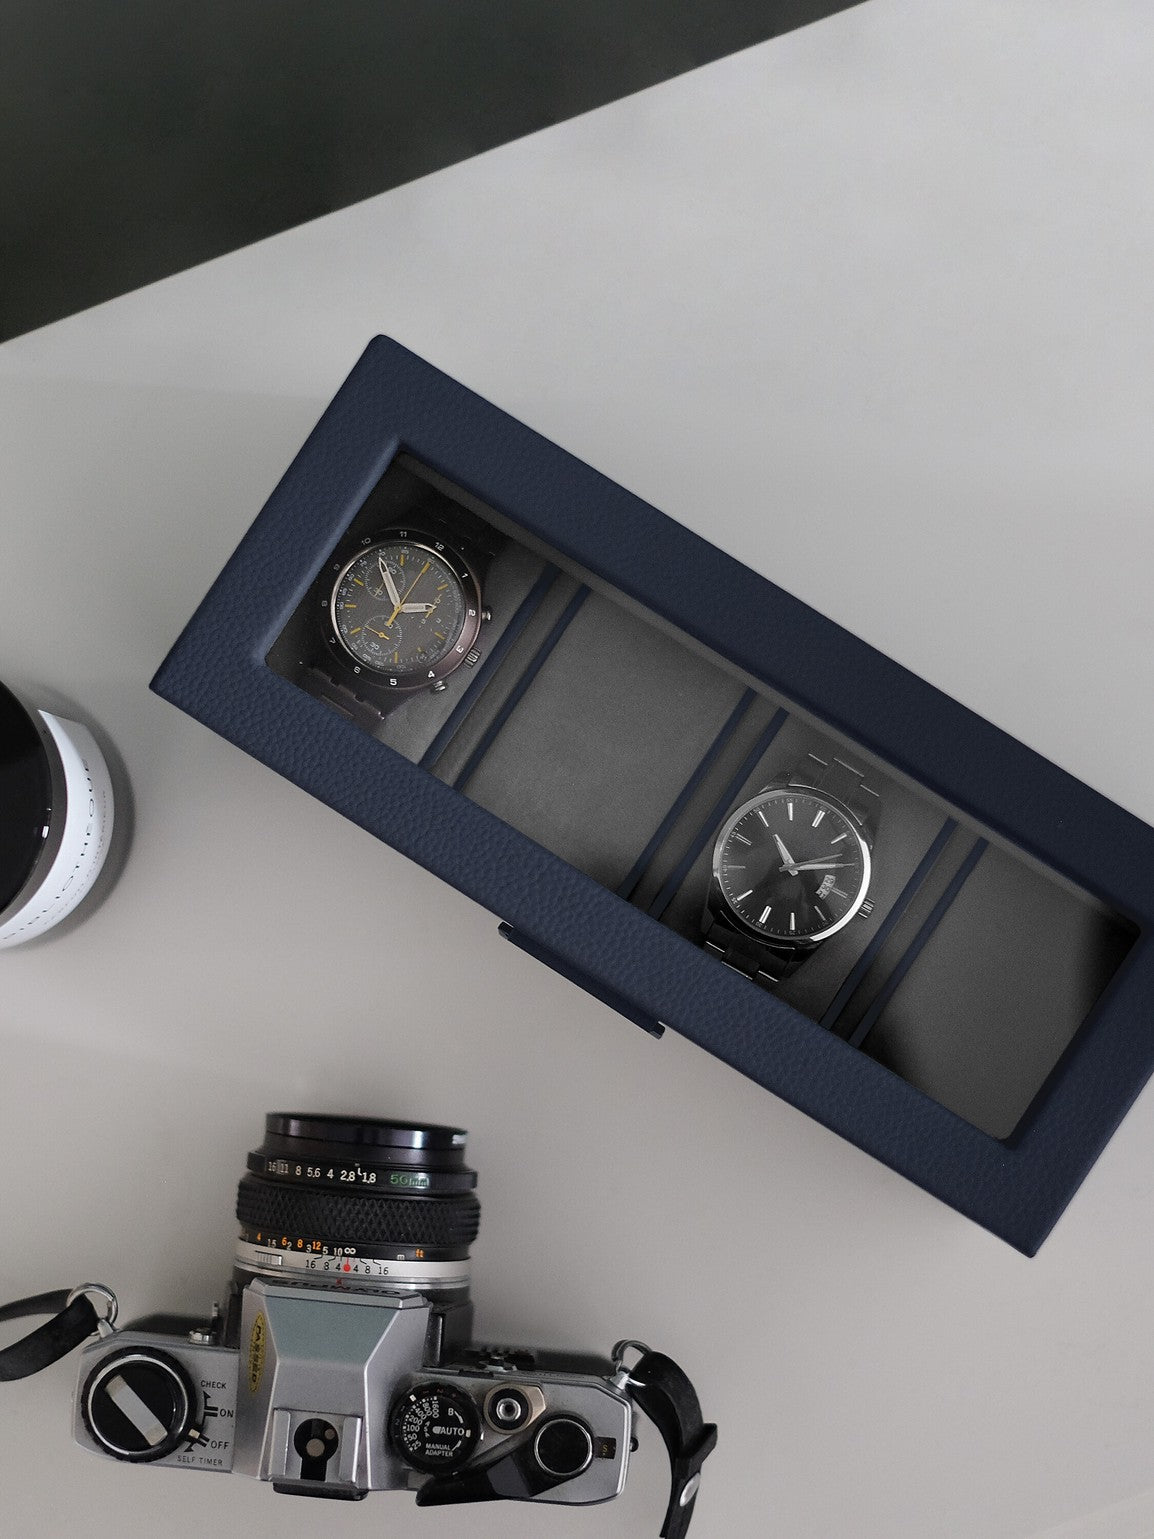 Stackers 4 piece watch box - Navy blue.